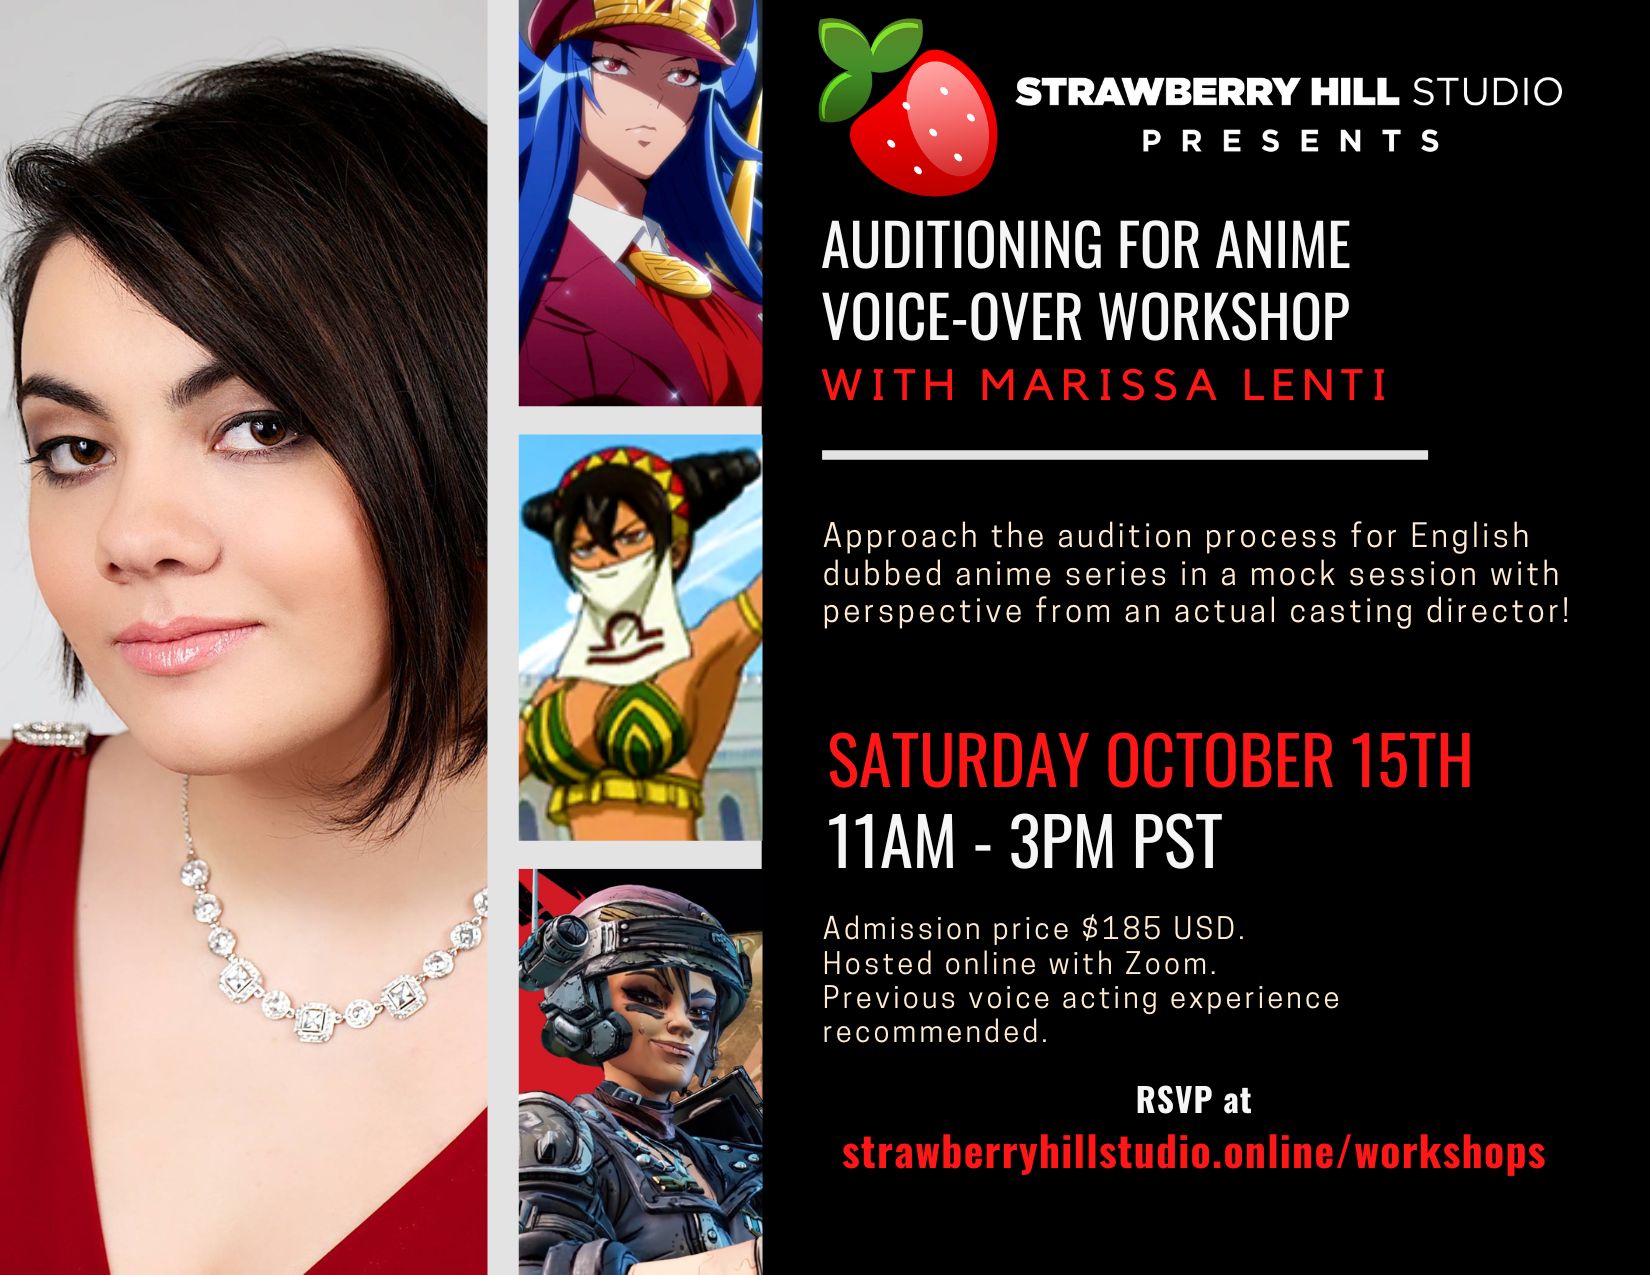 Auditioning for Anime Voice-Over Workshop w/ Marissa Lenti